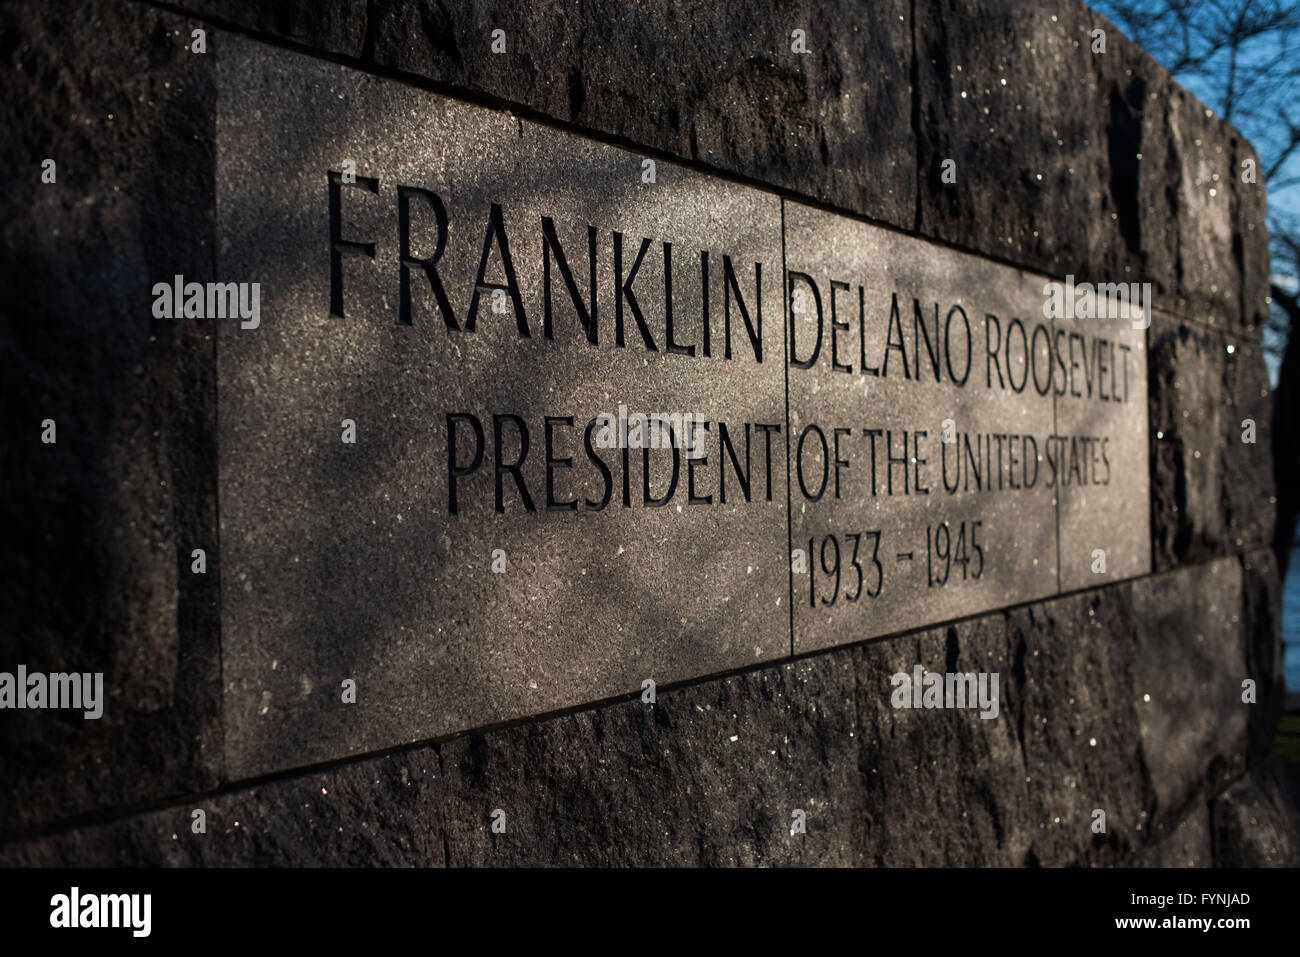 WASHINGTON DC, United States — A stone entrance sign at the southern end of the FDR Memorial in Washington DC. The Franklin Delano Roosevelt Memorial is a sprawling monument spread over 7.5 acres in the capital's West Potomac Park. The memorial, dedicated in 1997, serves as a tribute to the 32nd President of the United States, FDR, and his enduring influence on American history. Stock Photo